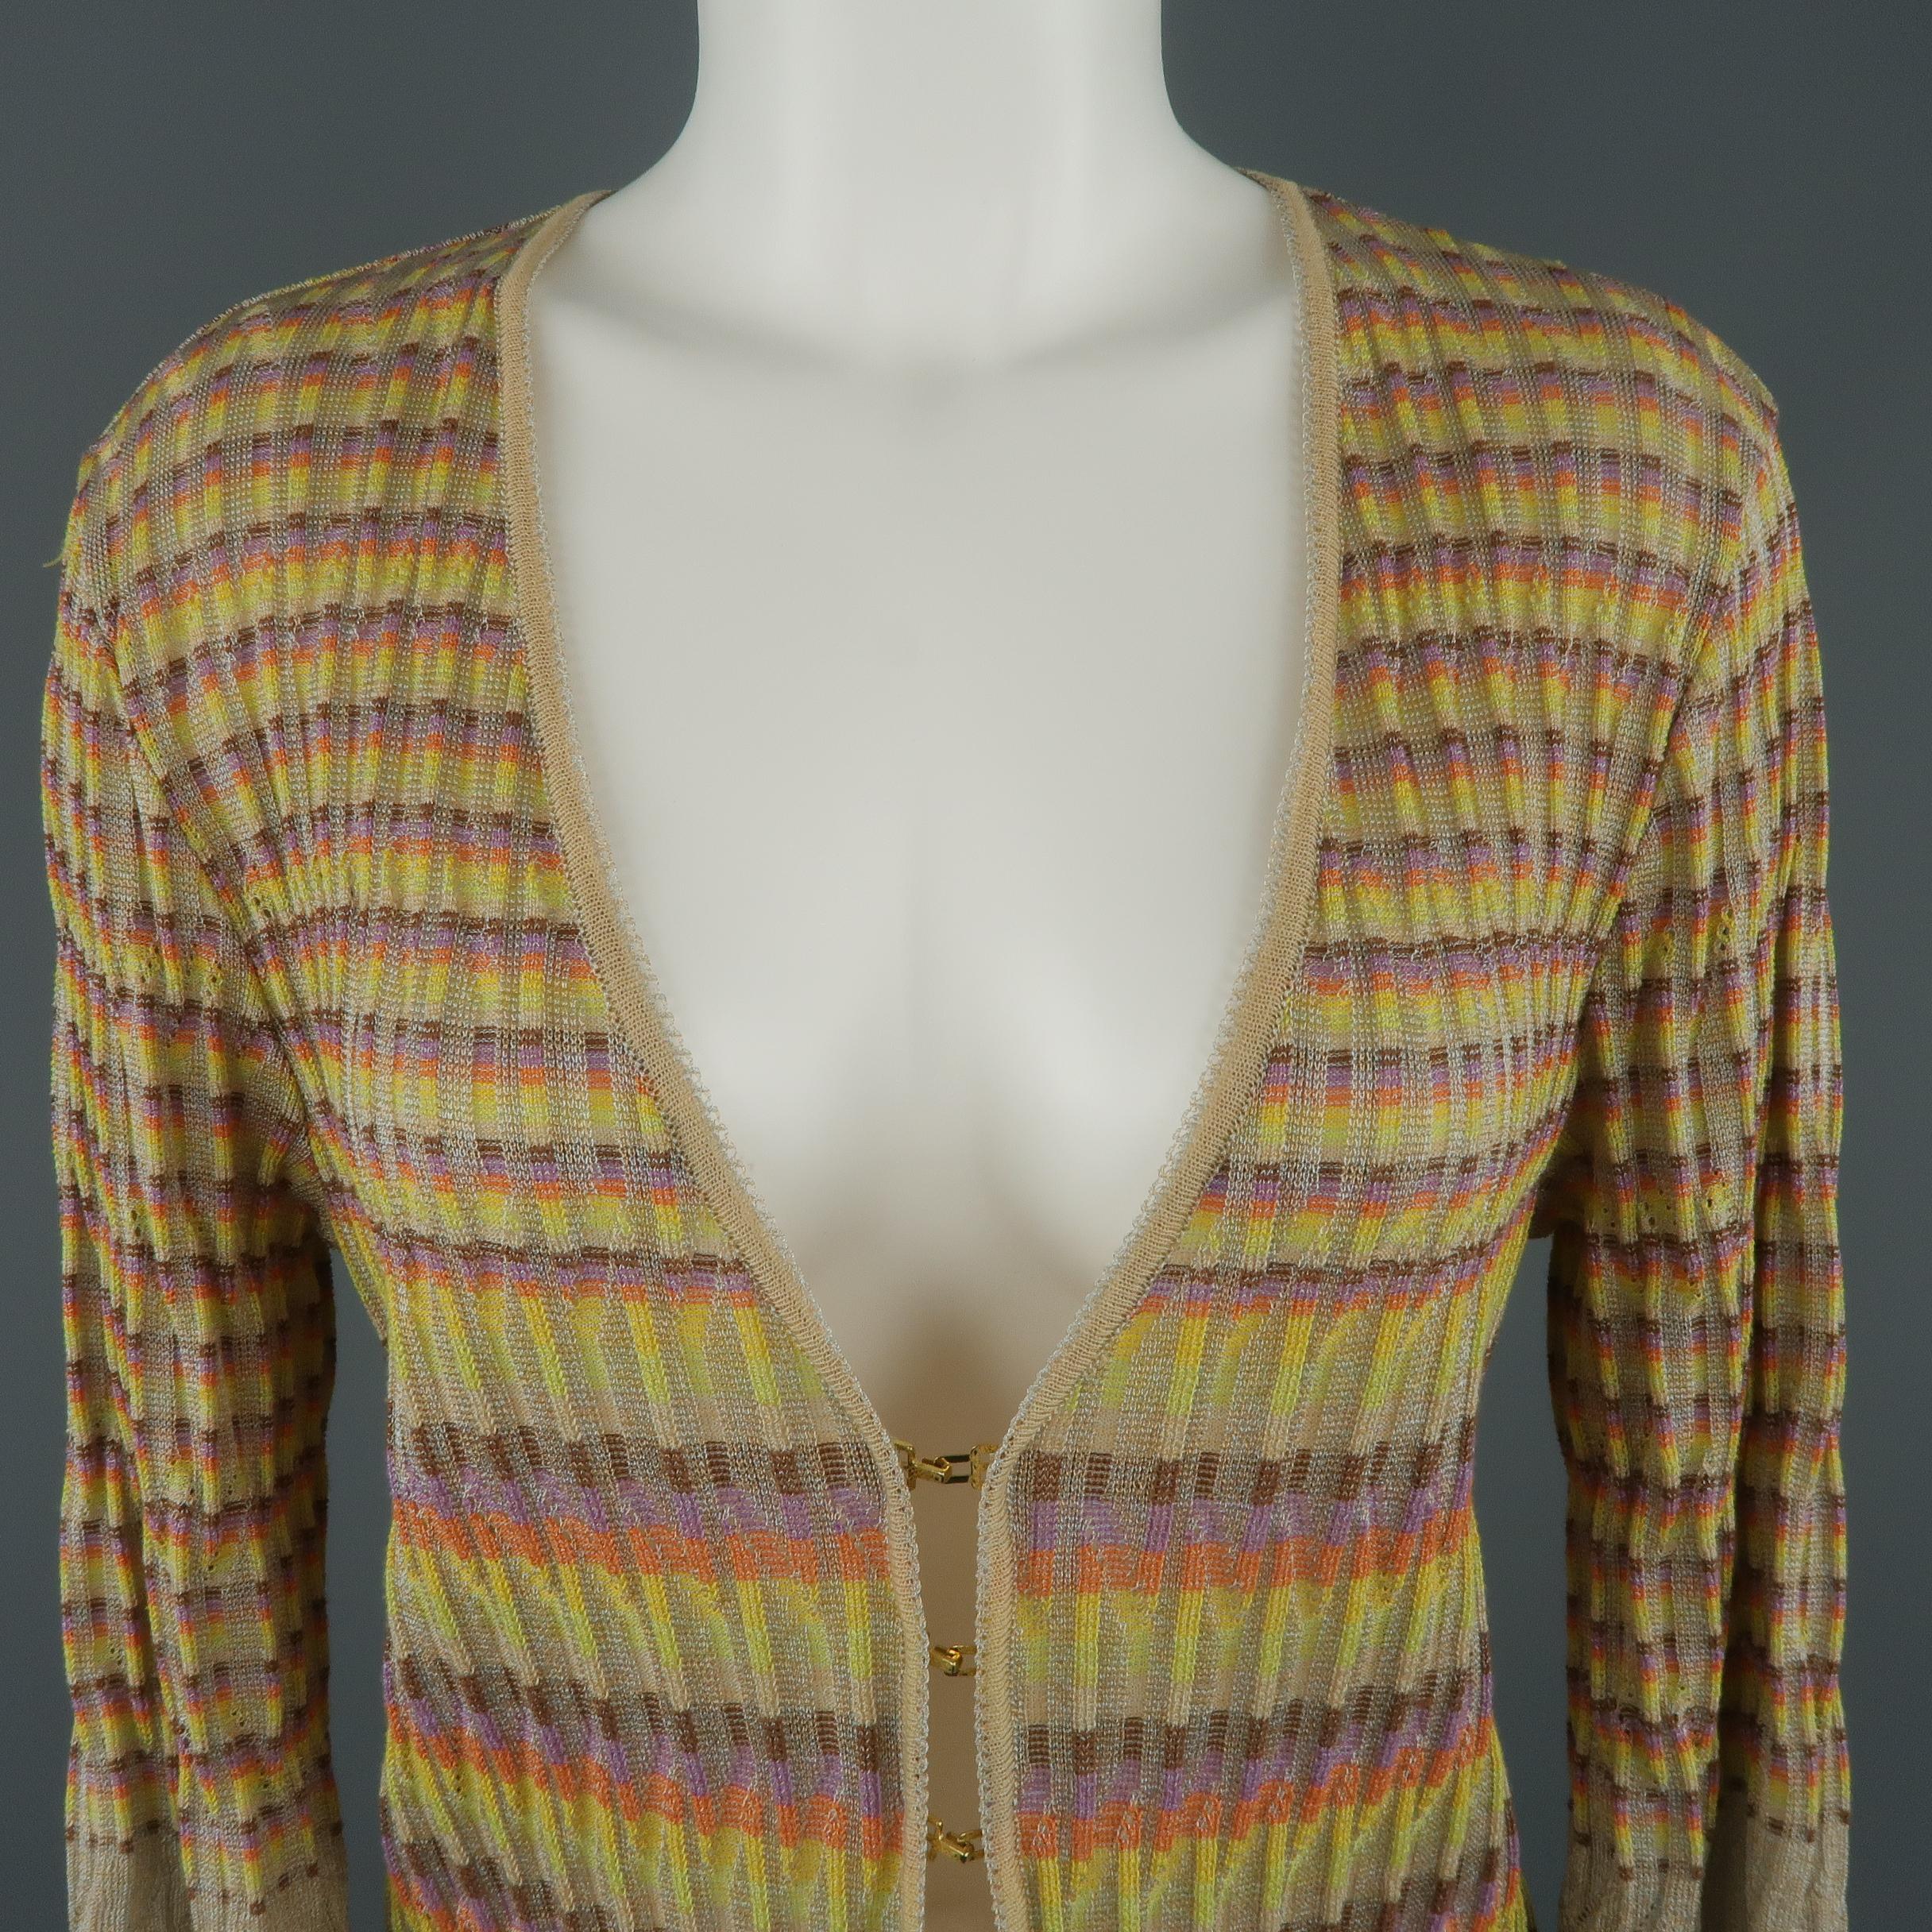 M MISSONI cardigan comes in a metallic beige cable like textured knit with rainbow stripe pattern throughout, v neck cropped three quarter sleeves, and three gold tone hook eye closures. Matching top available separately. Made in Italy.
 
Excellent